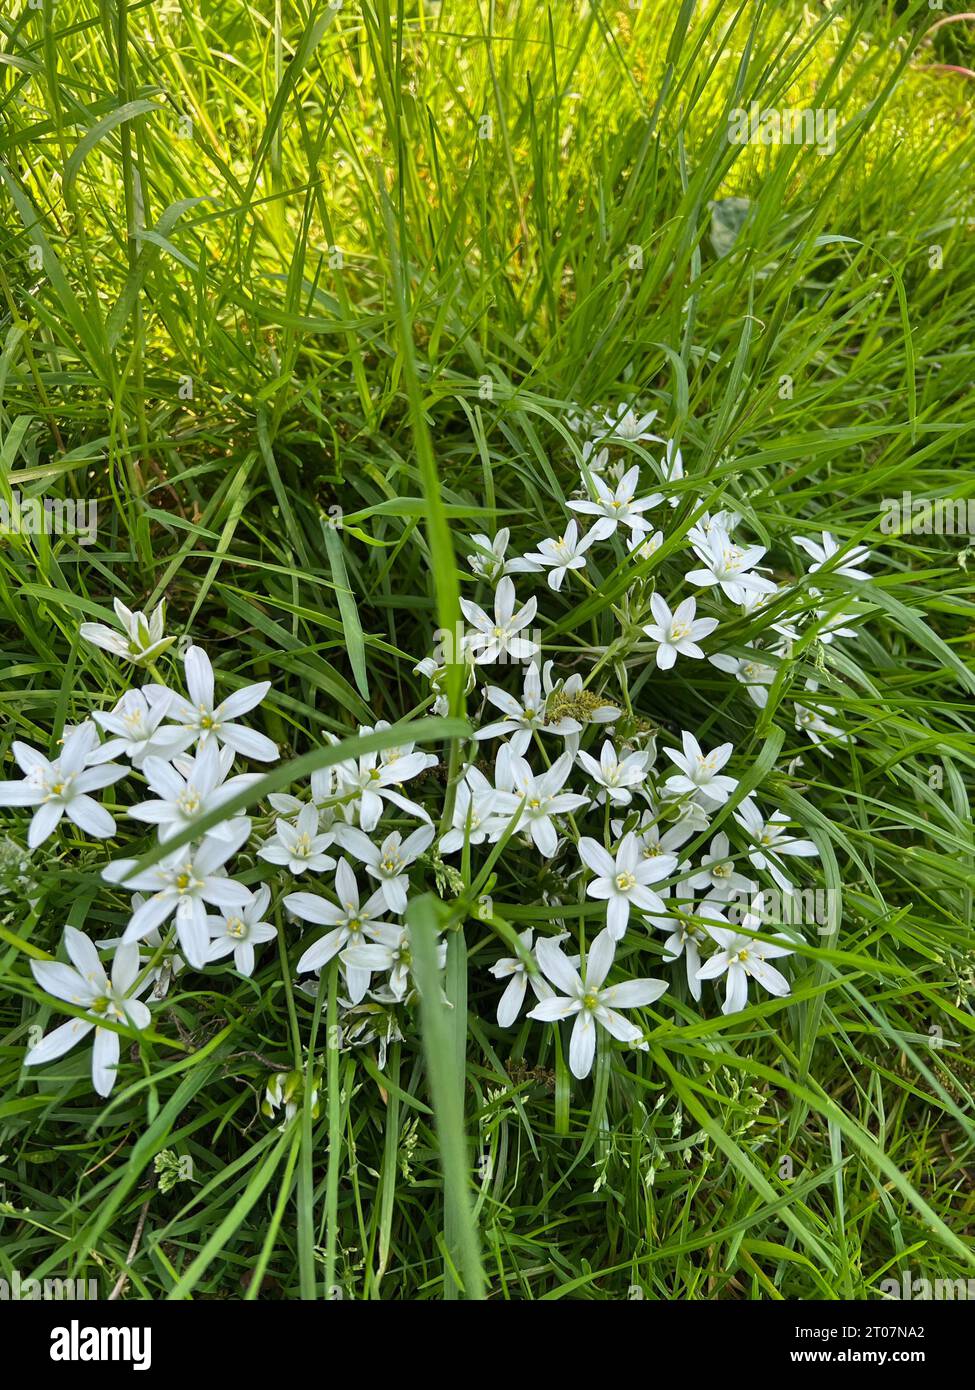 Beautiful white Ornithogalum flowers and green grass growing outdoors Stock Photo